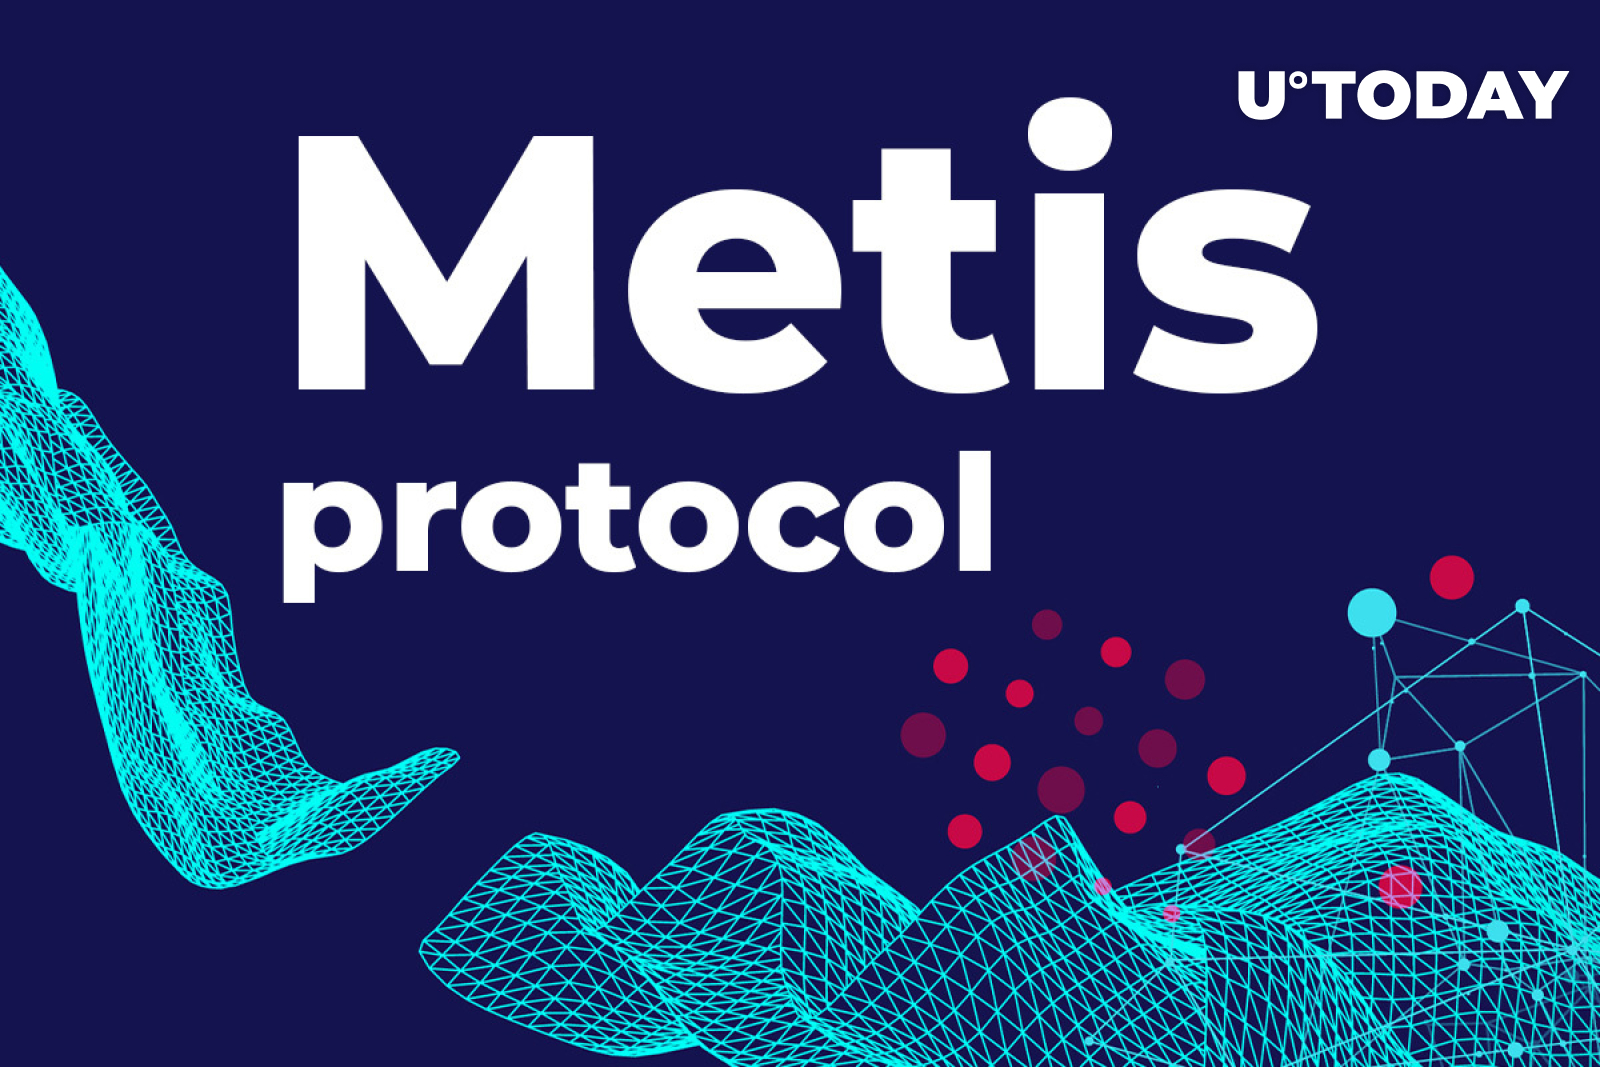 Deploy a Smart Contract on the Metis Blockchain